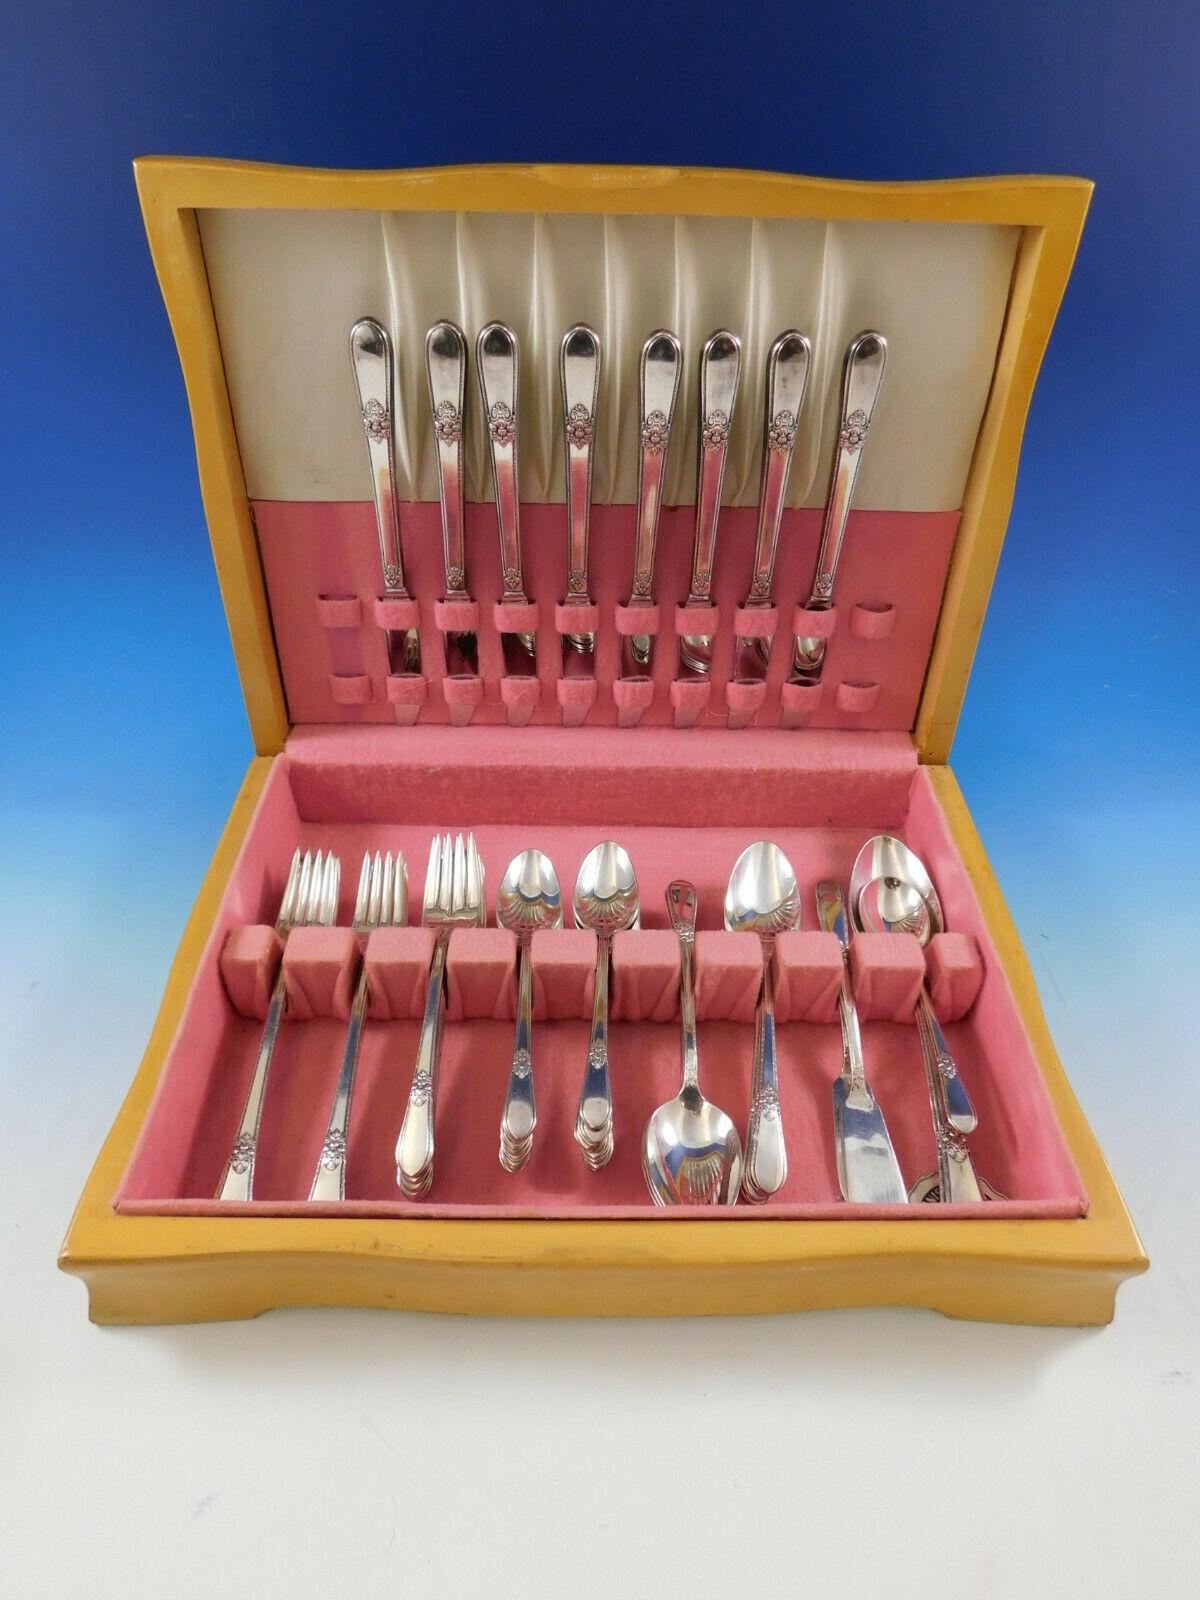 Adoration by 1847 Rogers Silverplate Flatware set, 53 pieces. This set is grille size with long handle knives and forks. This set includes:

 8 Grille Size Knives, 8 1/2